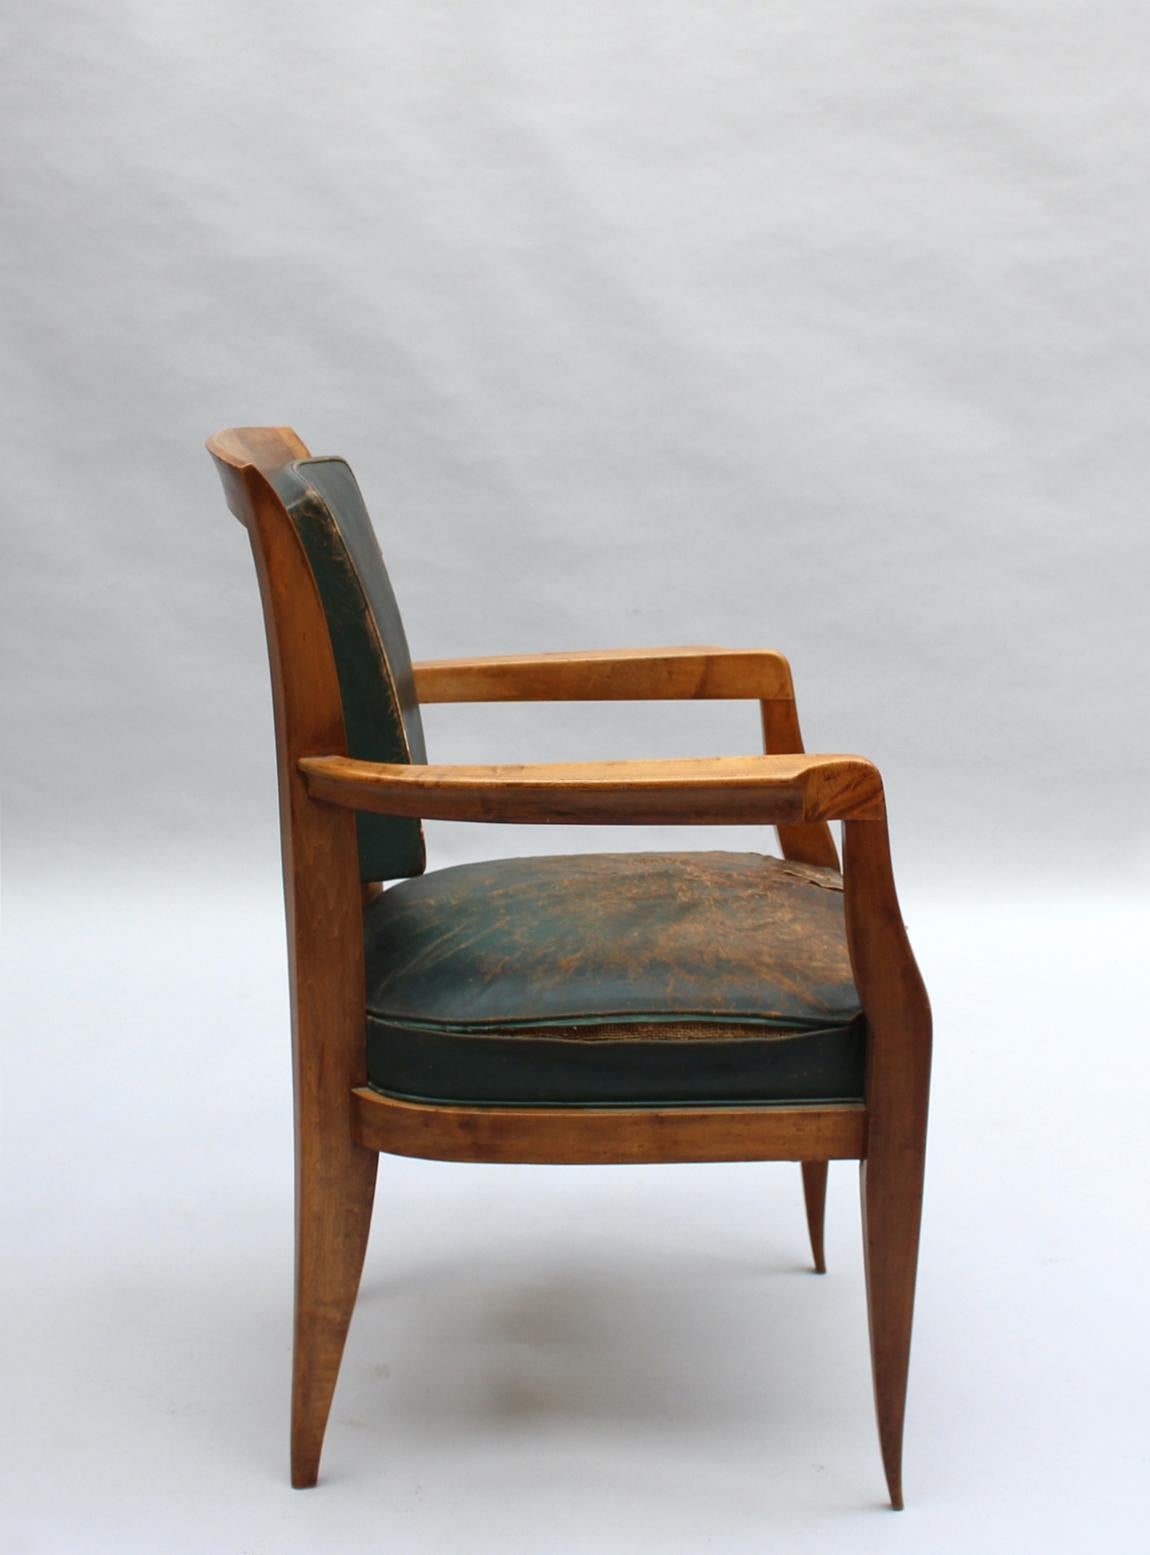 Fine French 1930s Desk Chair Attributed to Alfred Porteneuve In Good Condition For Sale In Long Island City, NY